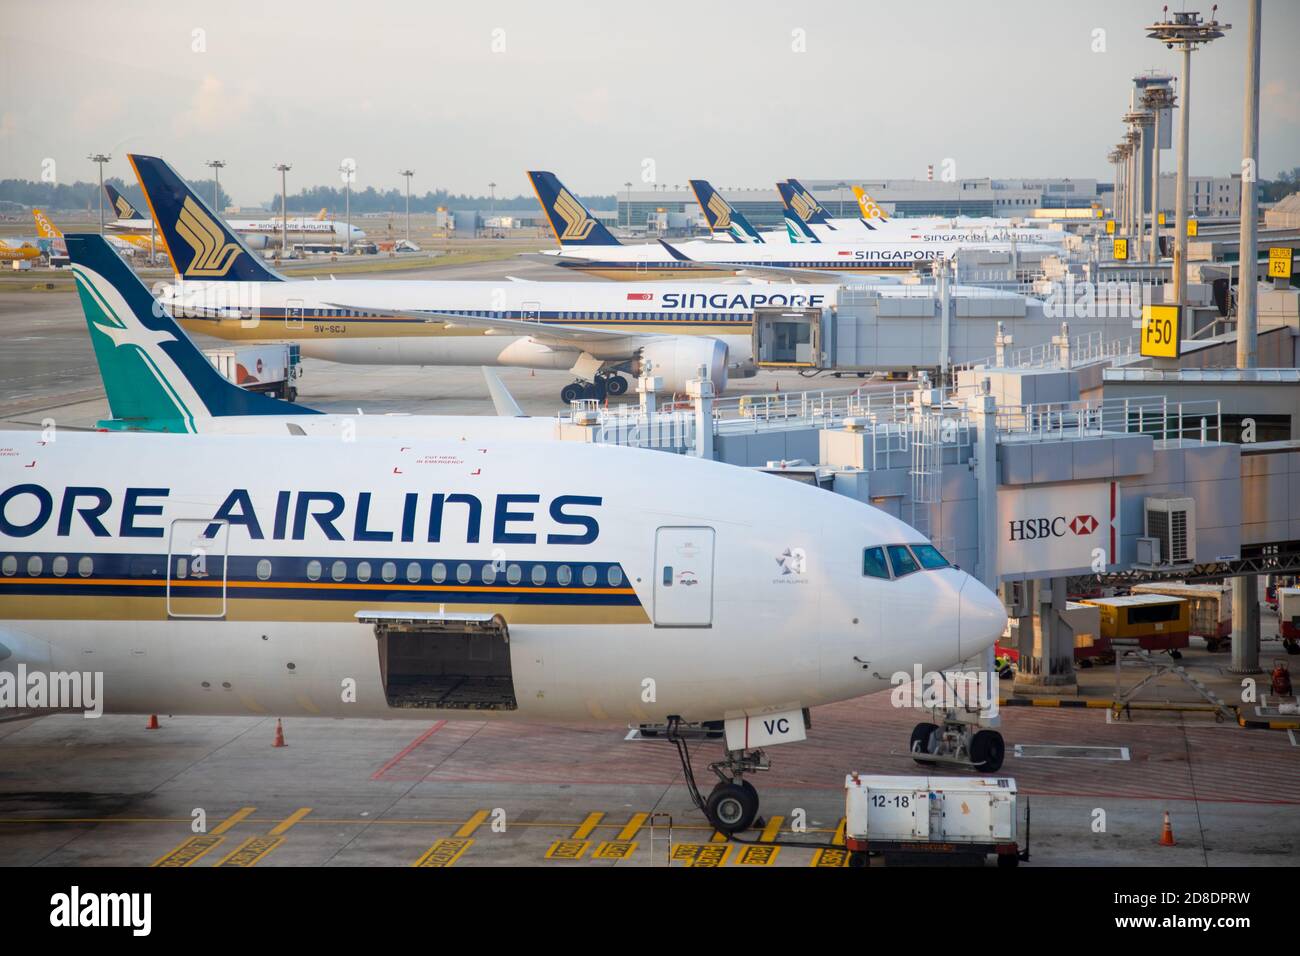 SINGAPORE - FEBRUARY 11, 2020: Singapore Airlines aircraft stand, loaded and serviced at the Jet bridge of changi airport Stock Photo